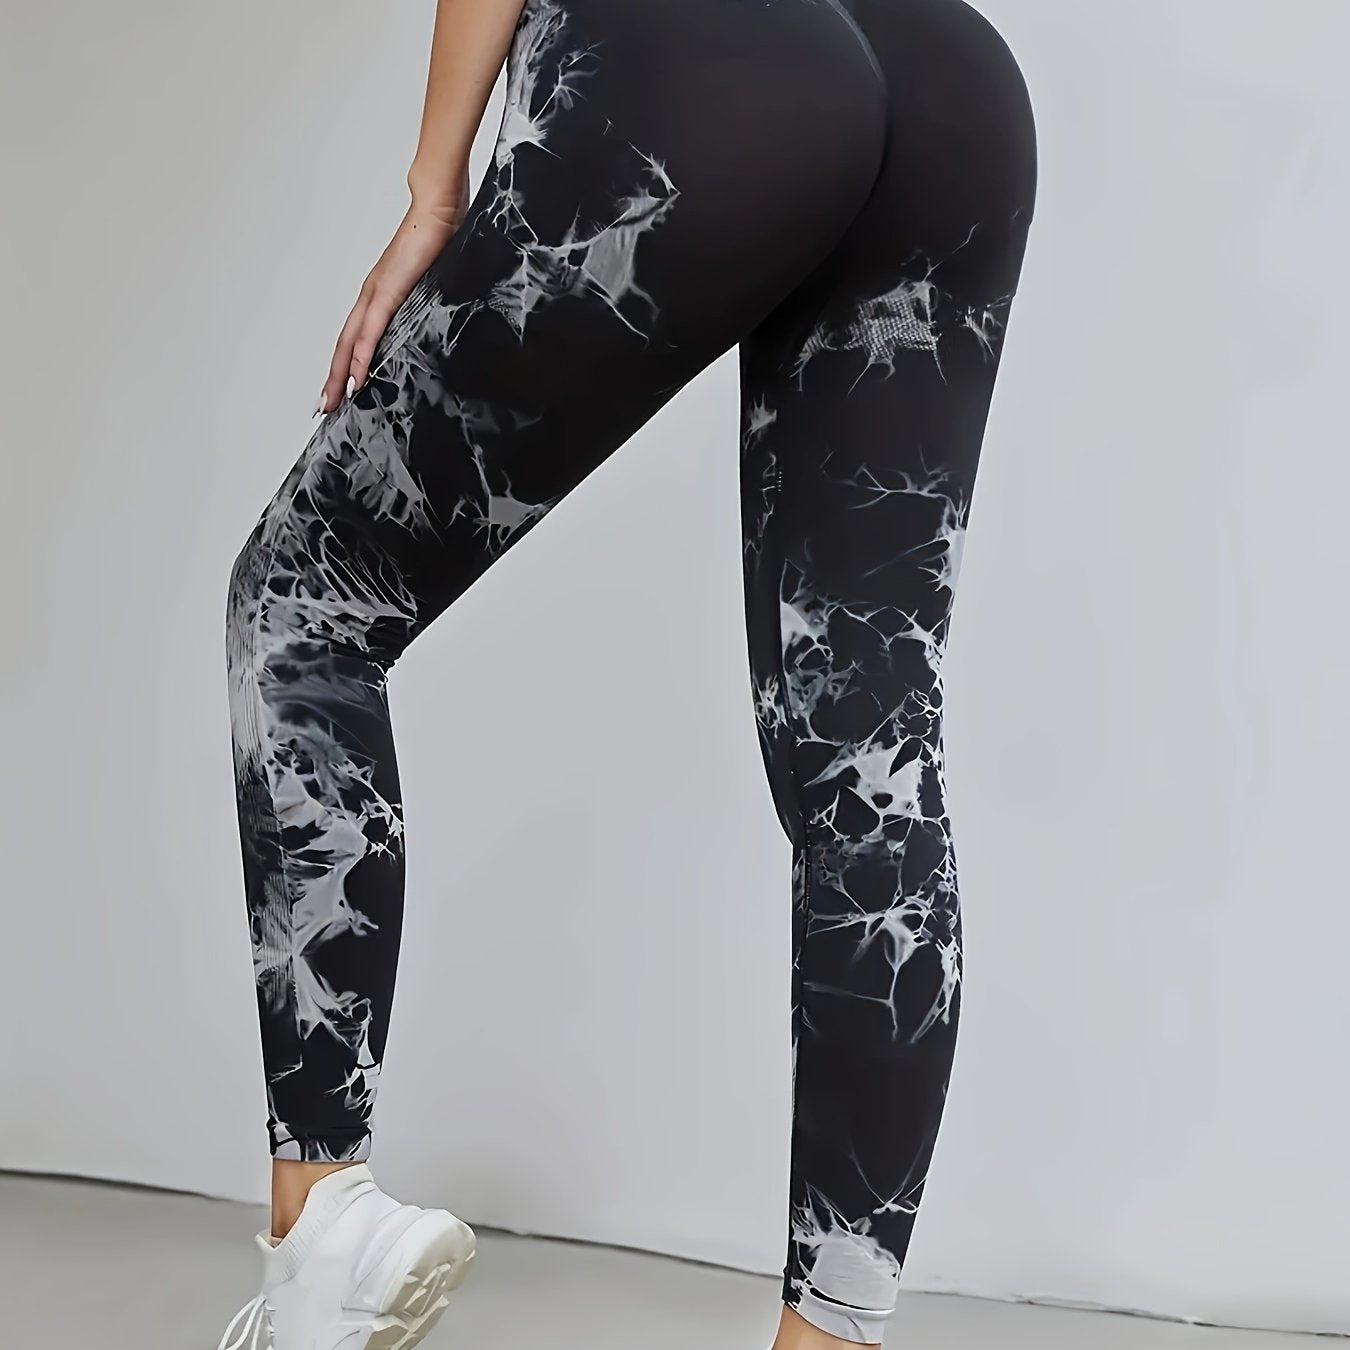 xieyinshe  Tie Dye High Waist Yoga Seamless Sports Leggings, Running Training Exercise Tight Stretch Fitness Pants, Women's Activewear